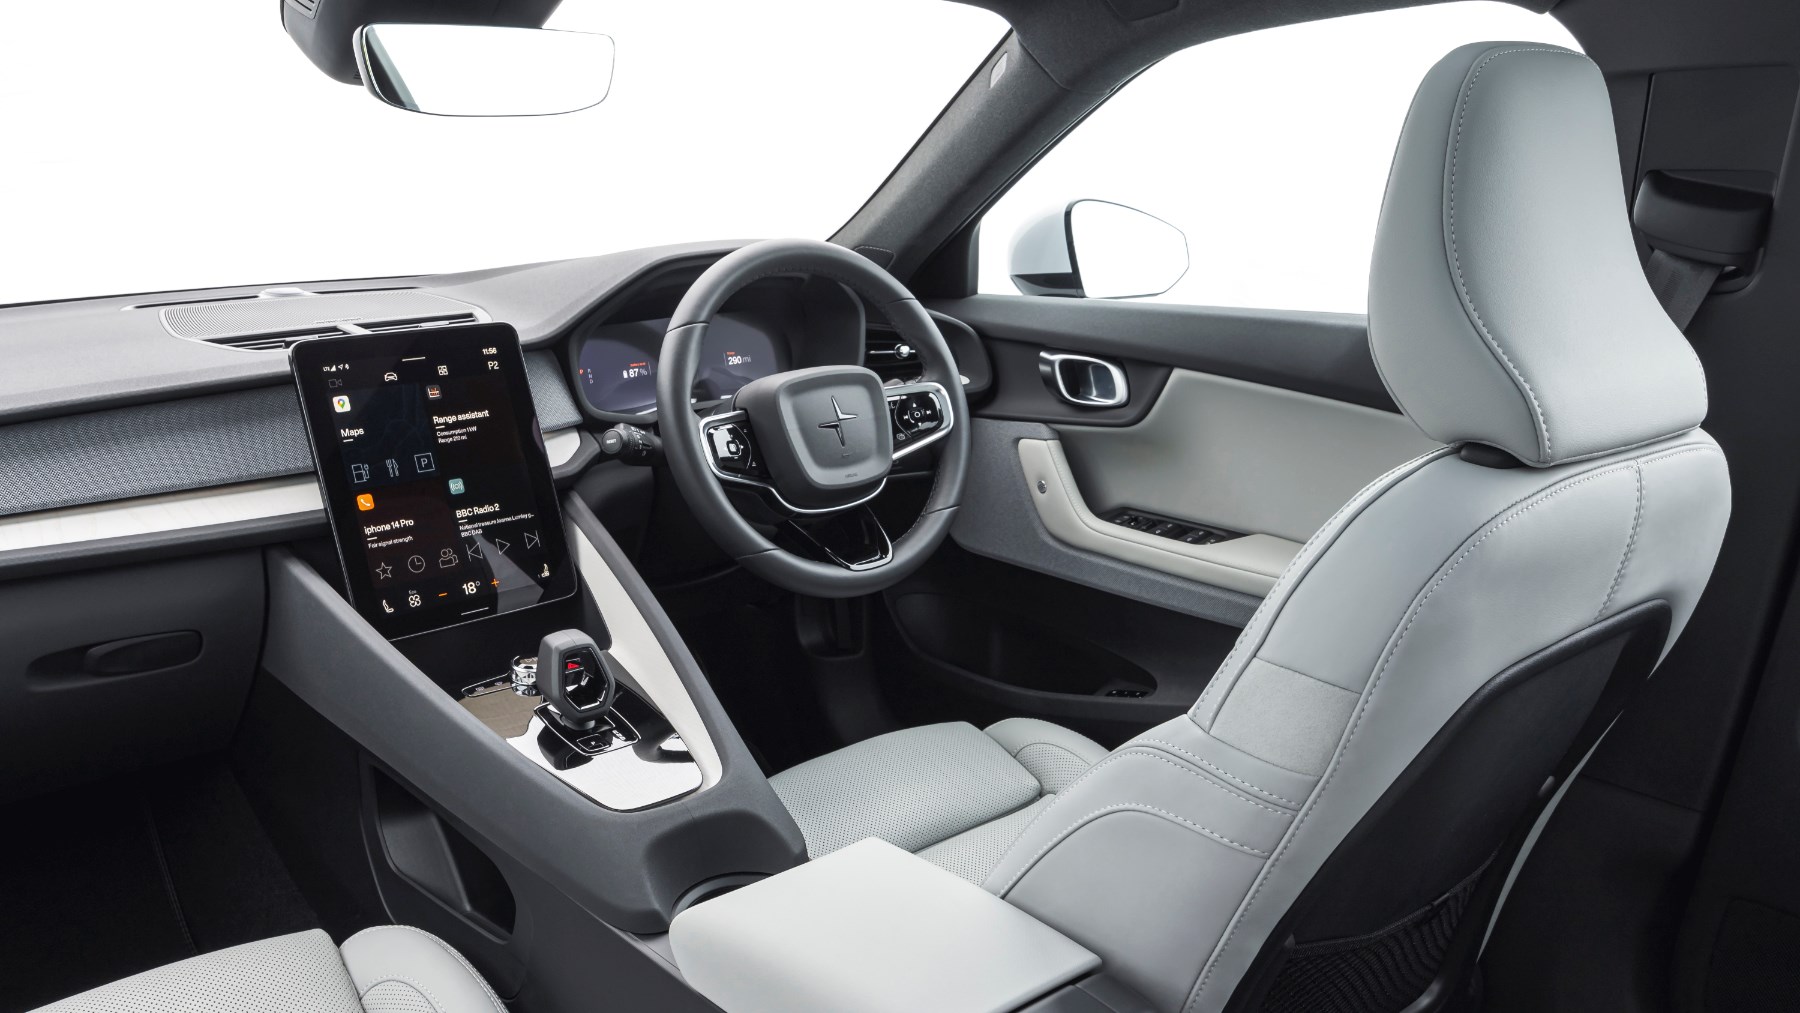 2022 Polestar 2 Interior Review: A Cabin for the Thinking Driver